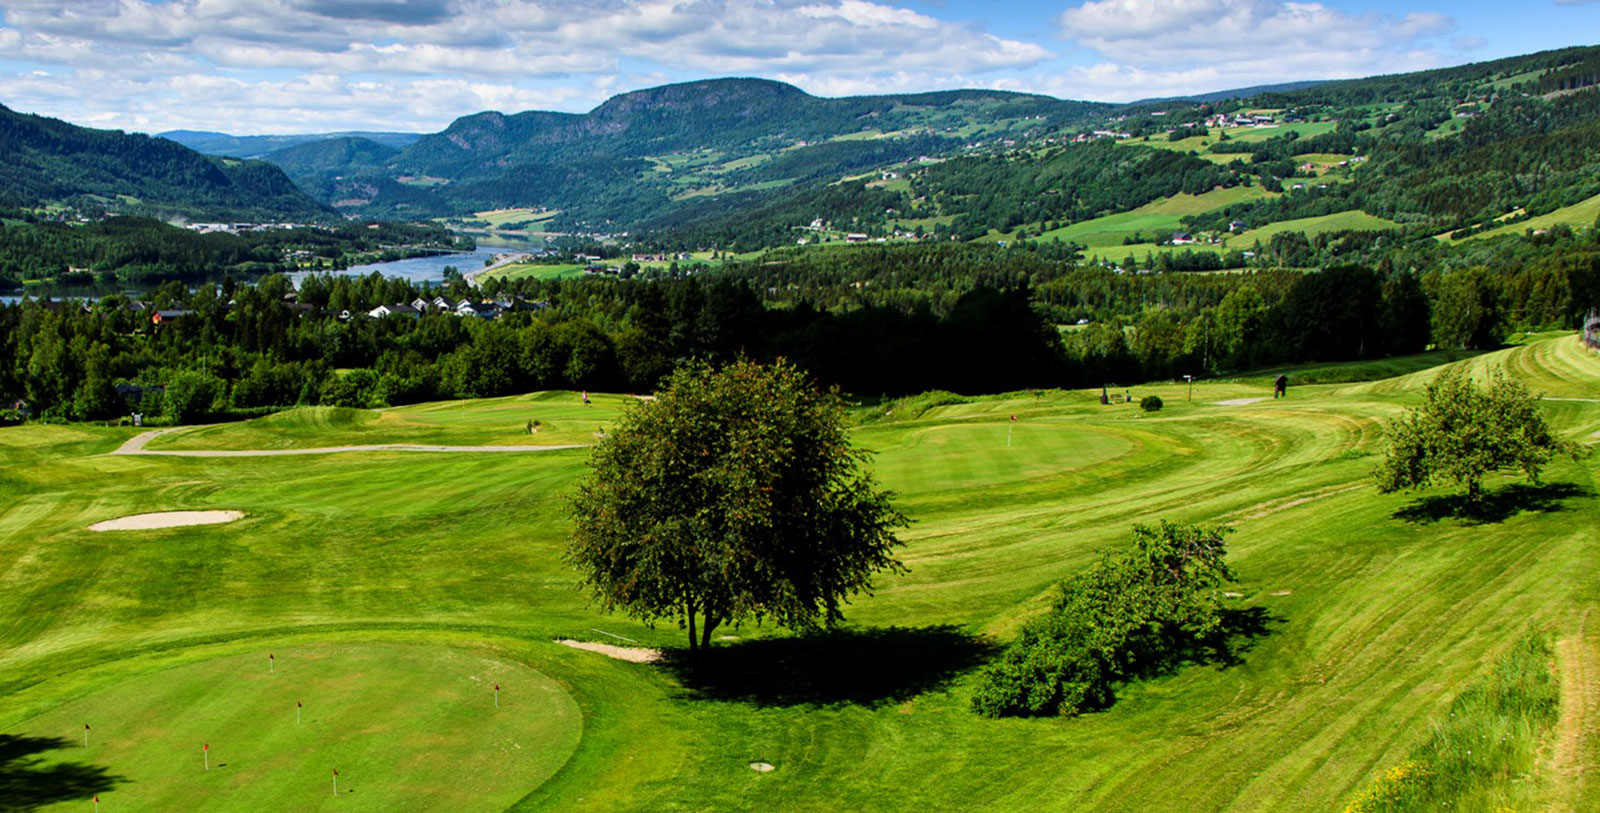 Explore the hotel's spacious grounds and play a round of golf.